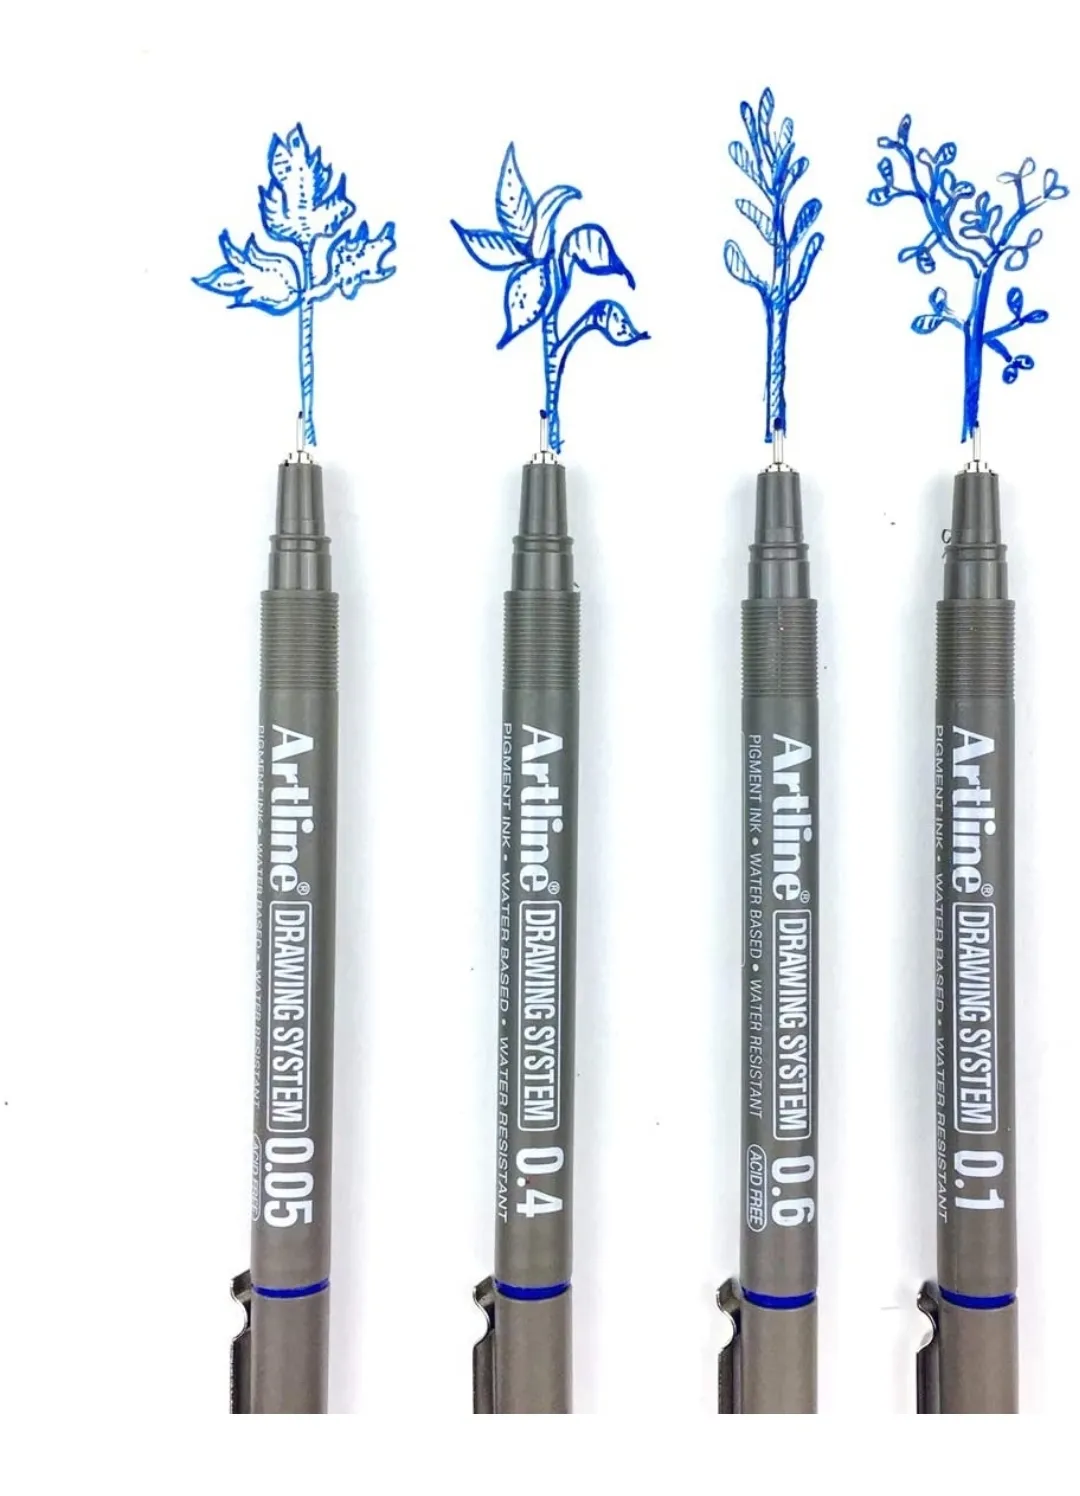 Artline Drawing System Artistic Technical Pen 0.05 mm Point Size Pack of 1